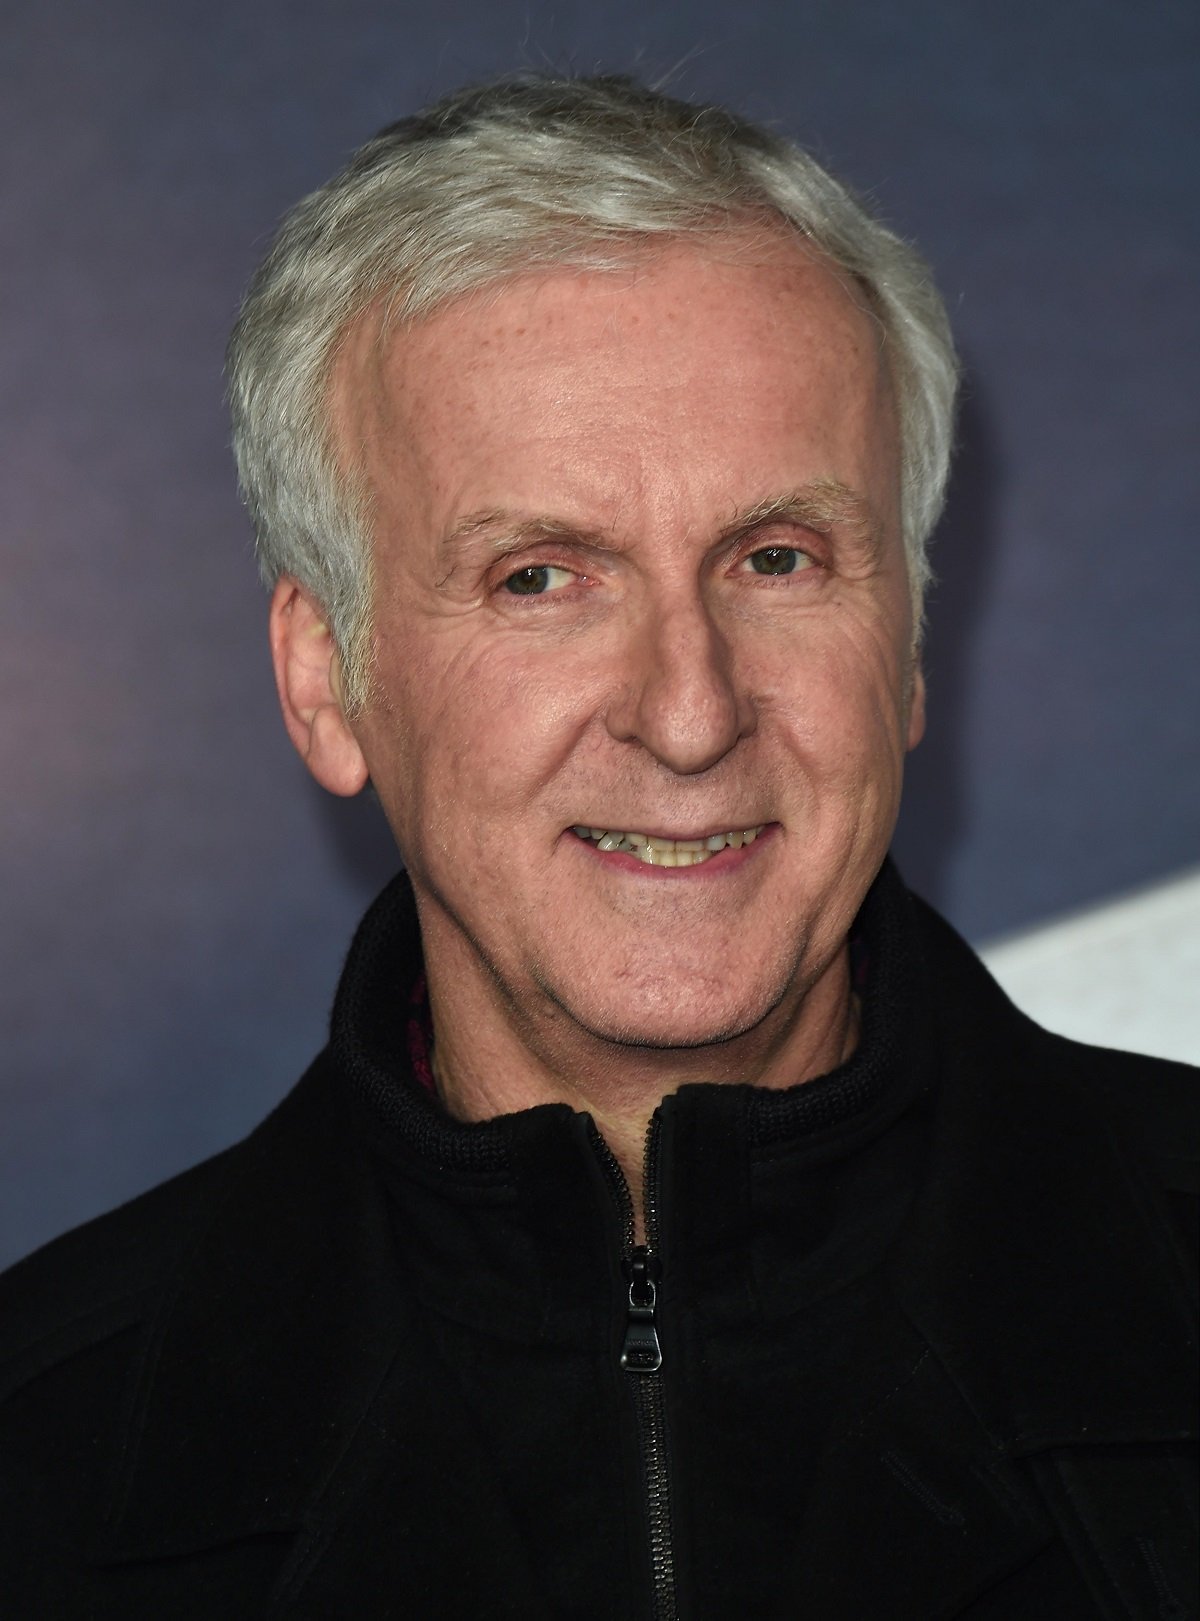 "Avatar" director James Cameron on January 31, 2019 in London, England | Source: Getty Images 